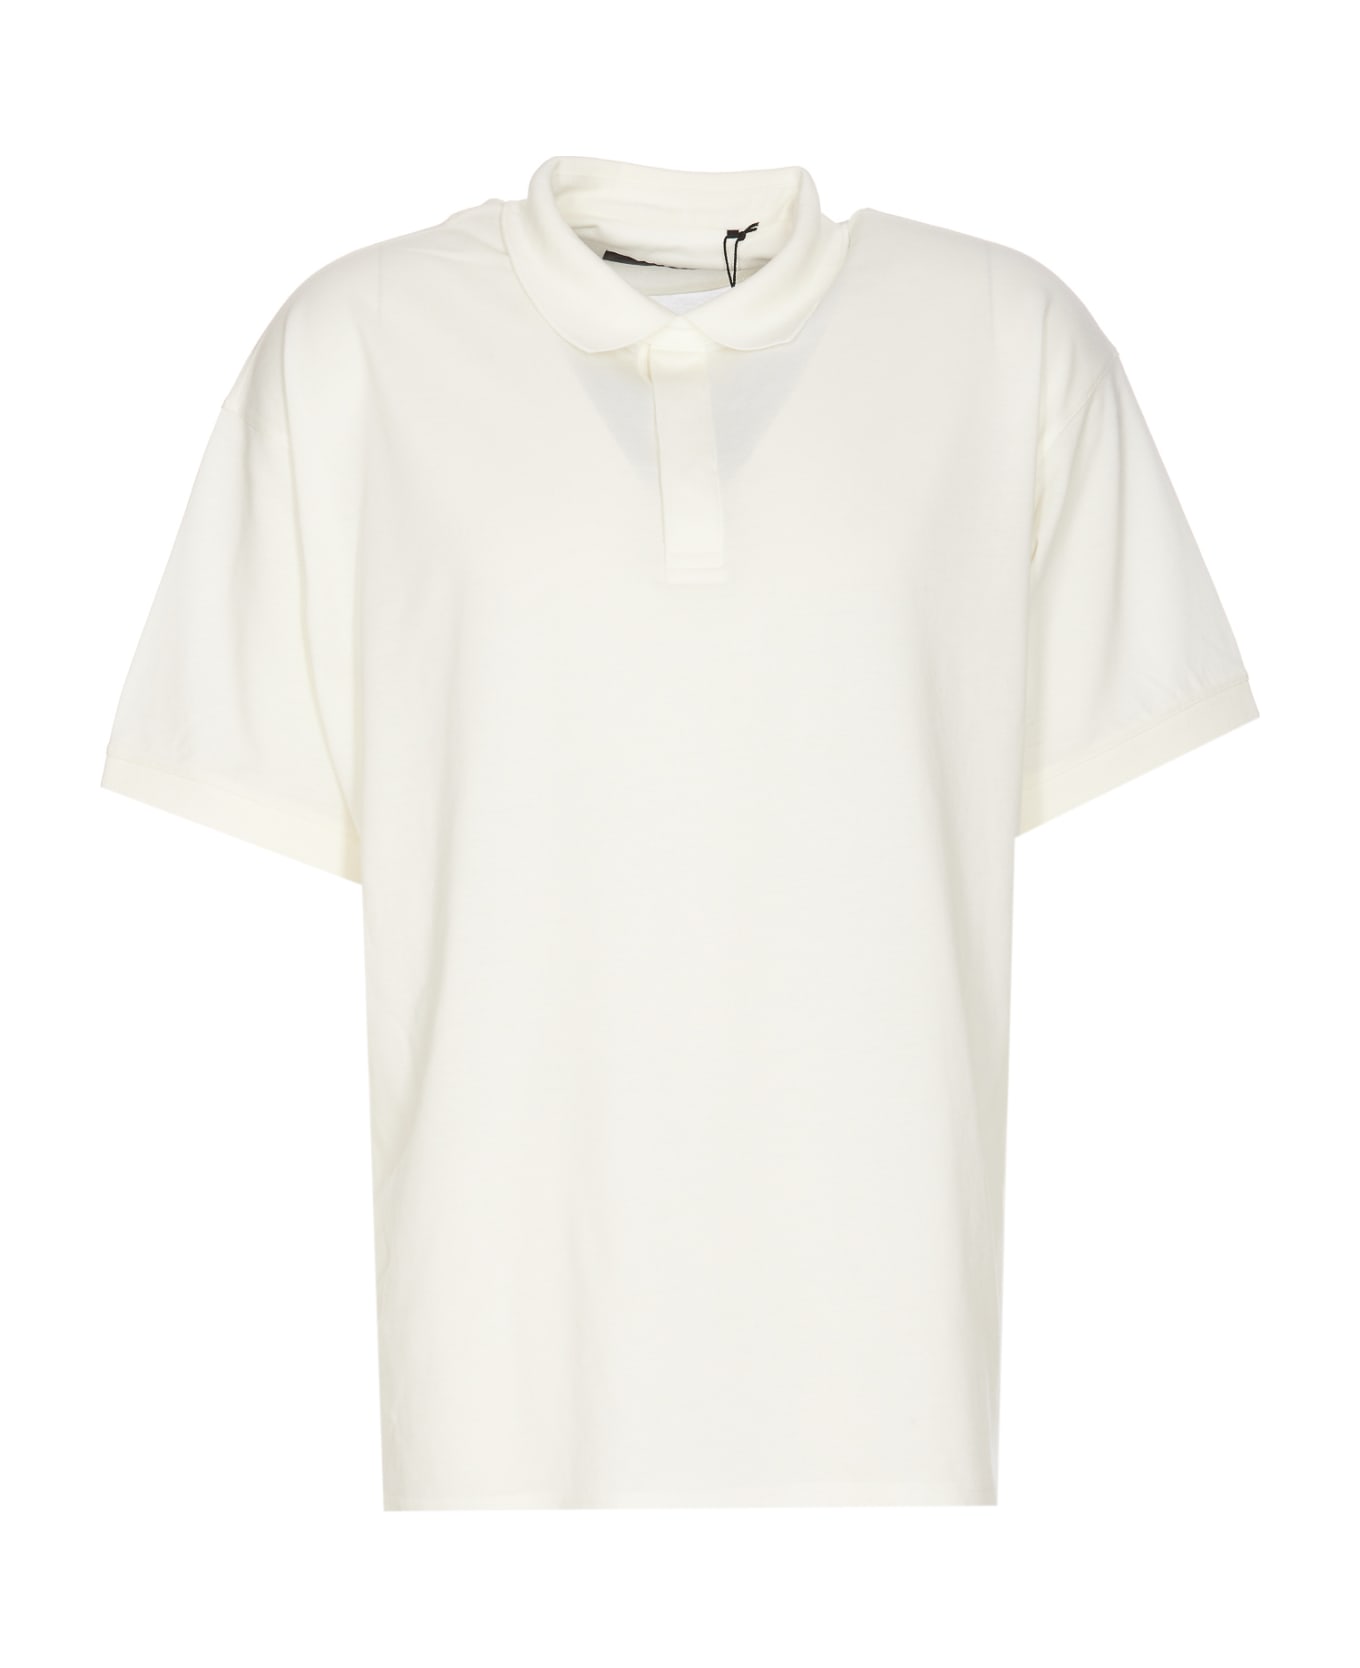 Y-3 Polo - White ポロシャツ